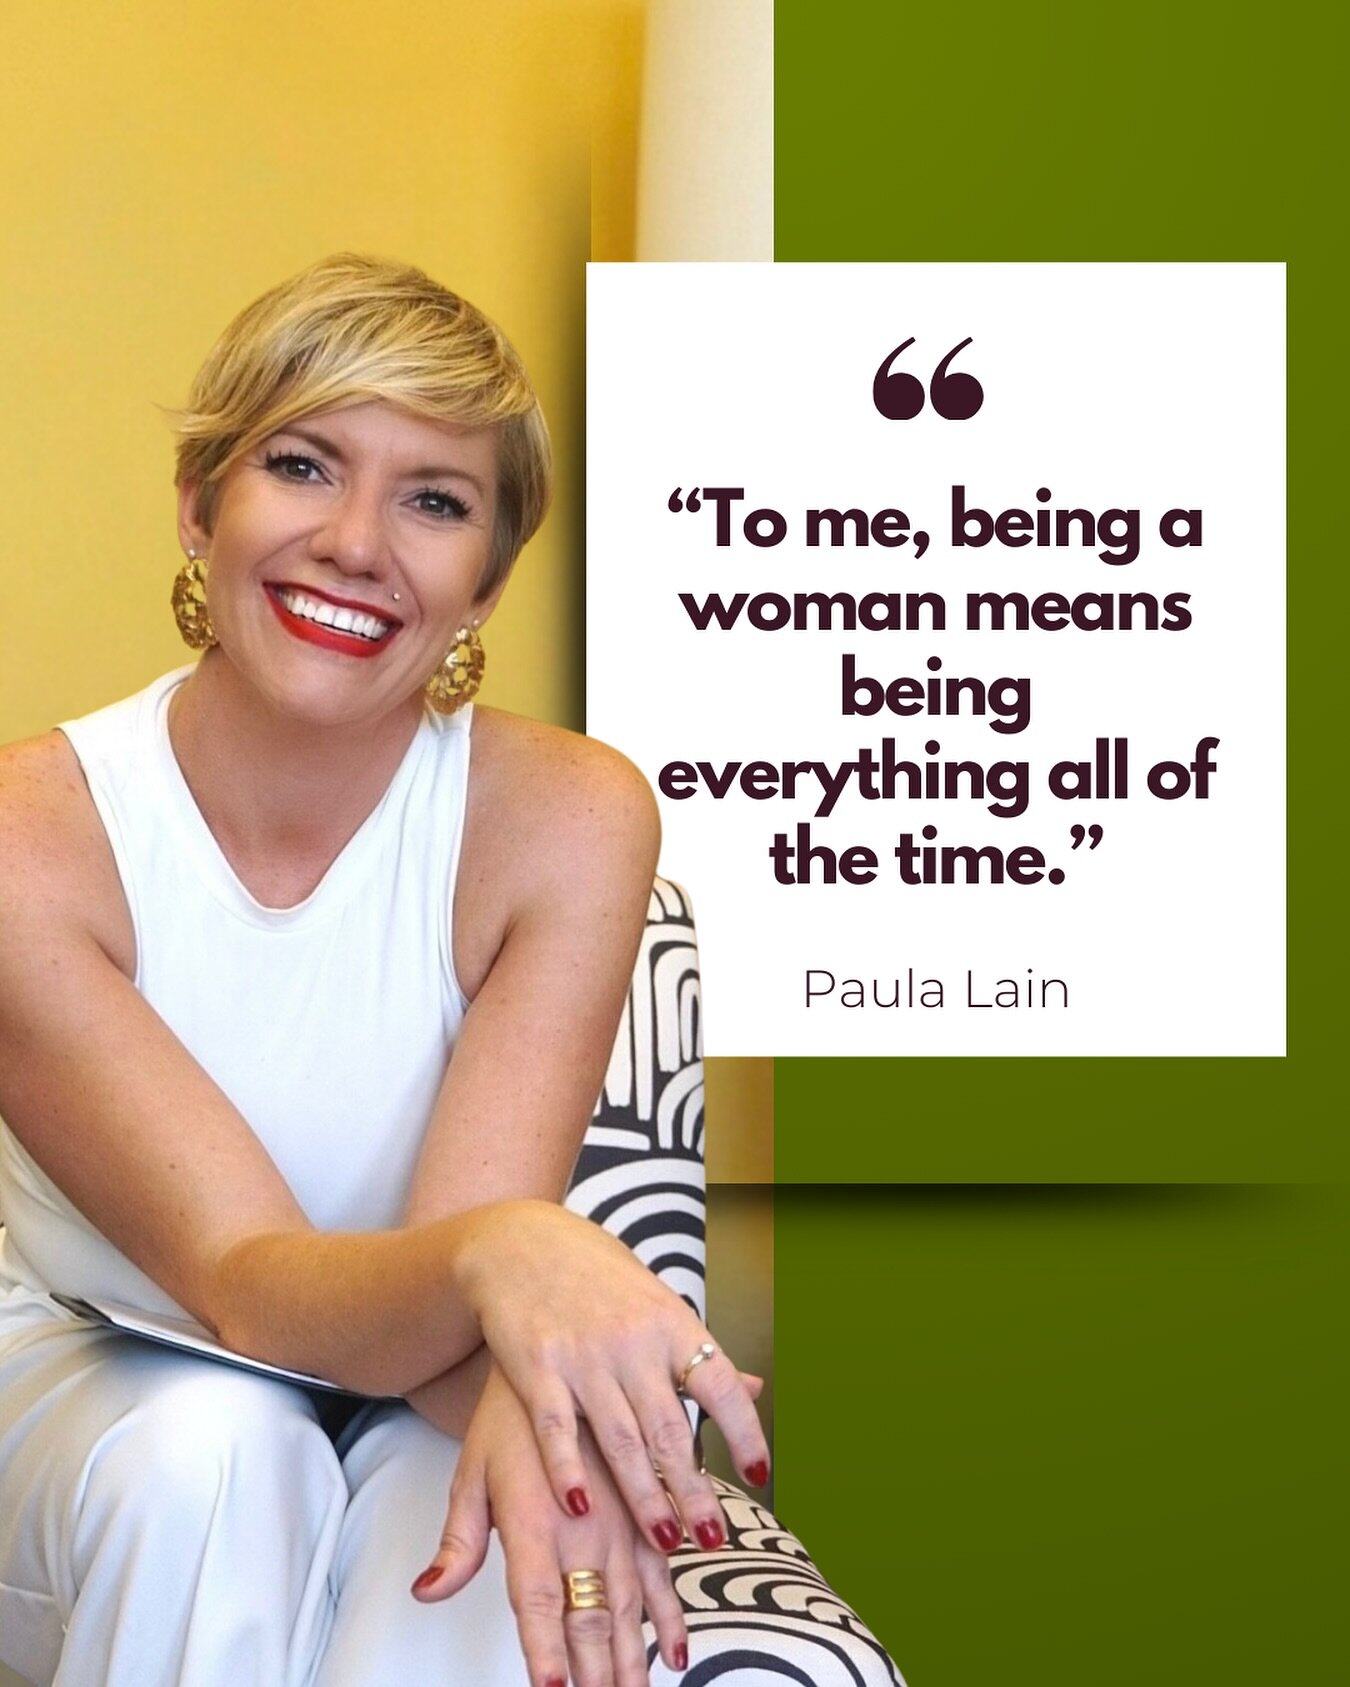 In the spirit of Women&rsquo;s History Month, we&rsquo;re spotlighting womanhood and what it means to be a woman. This week&rsquo;s response comes from Paula Lain, owner of Paula Lain Counseling!

&ldquo;To me, being a woman means being everything al